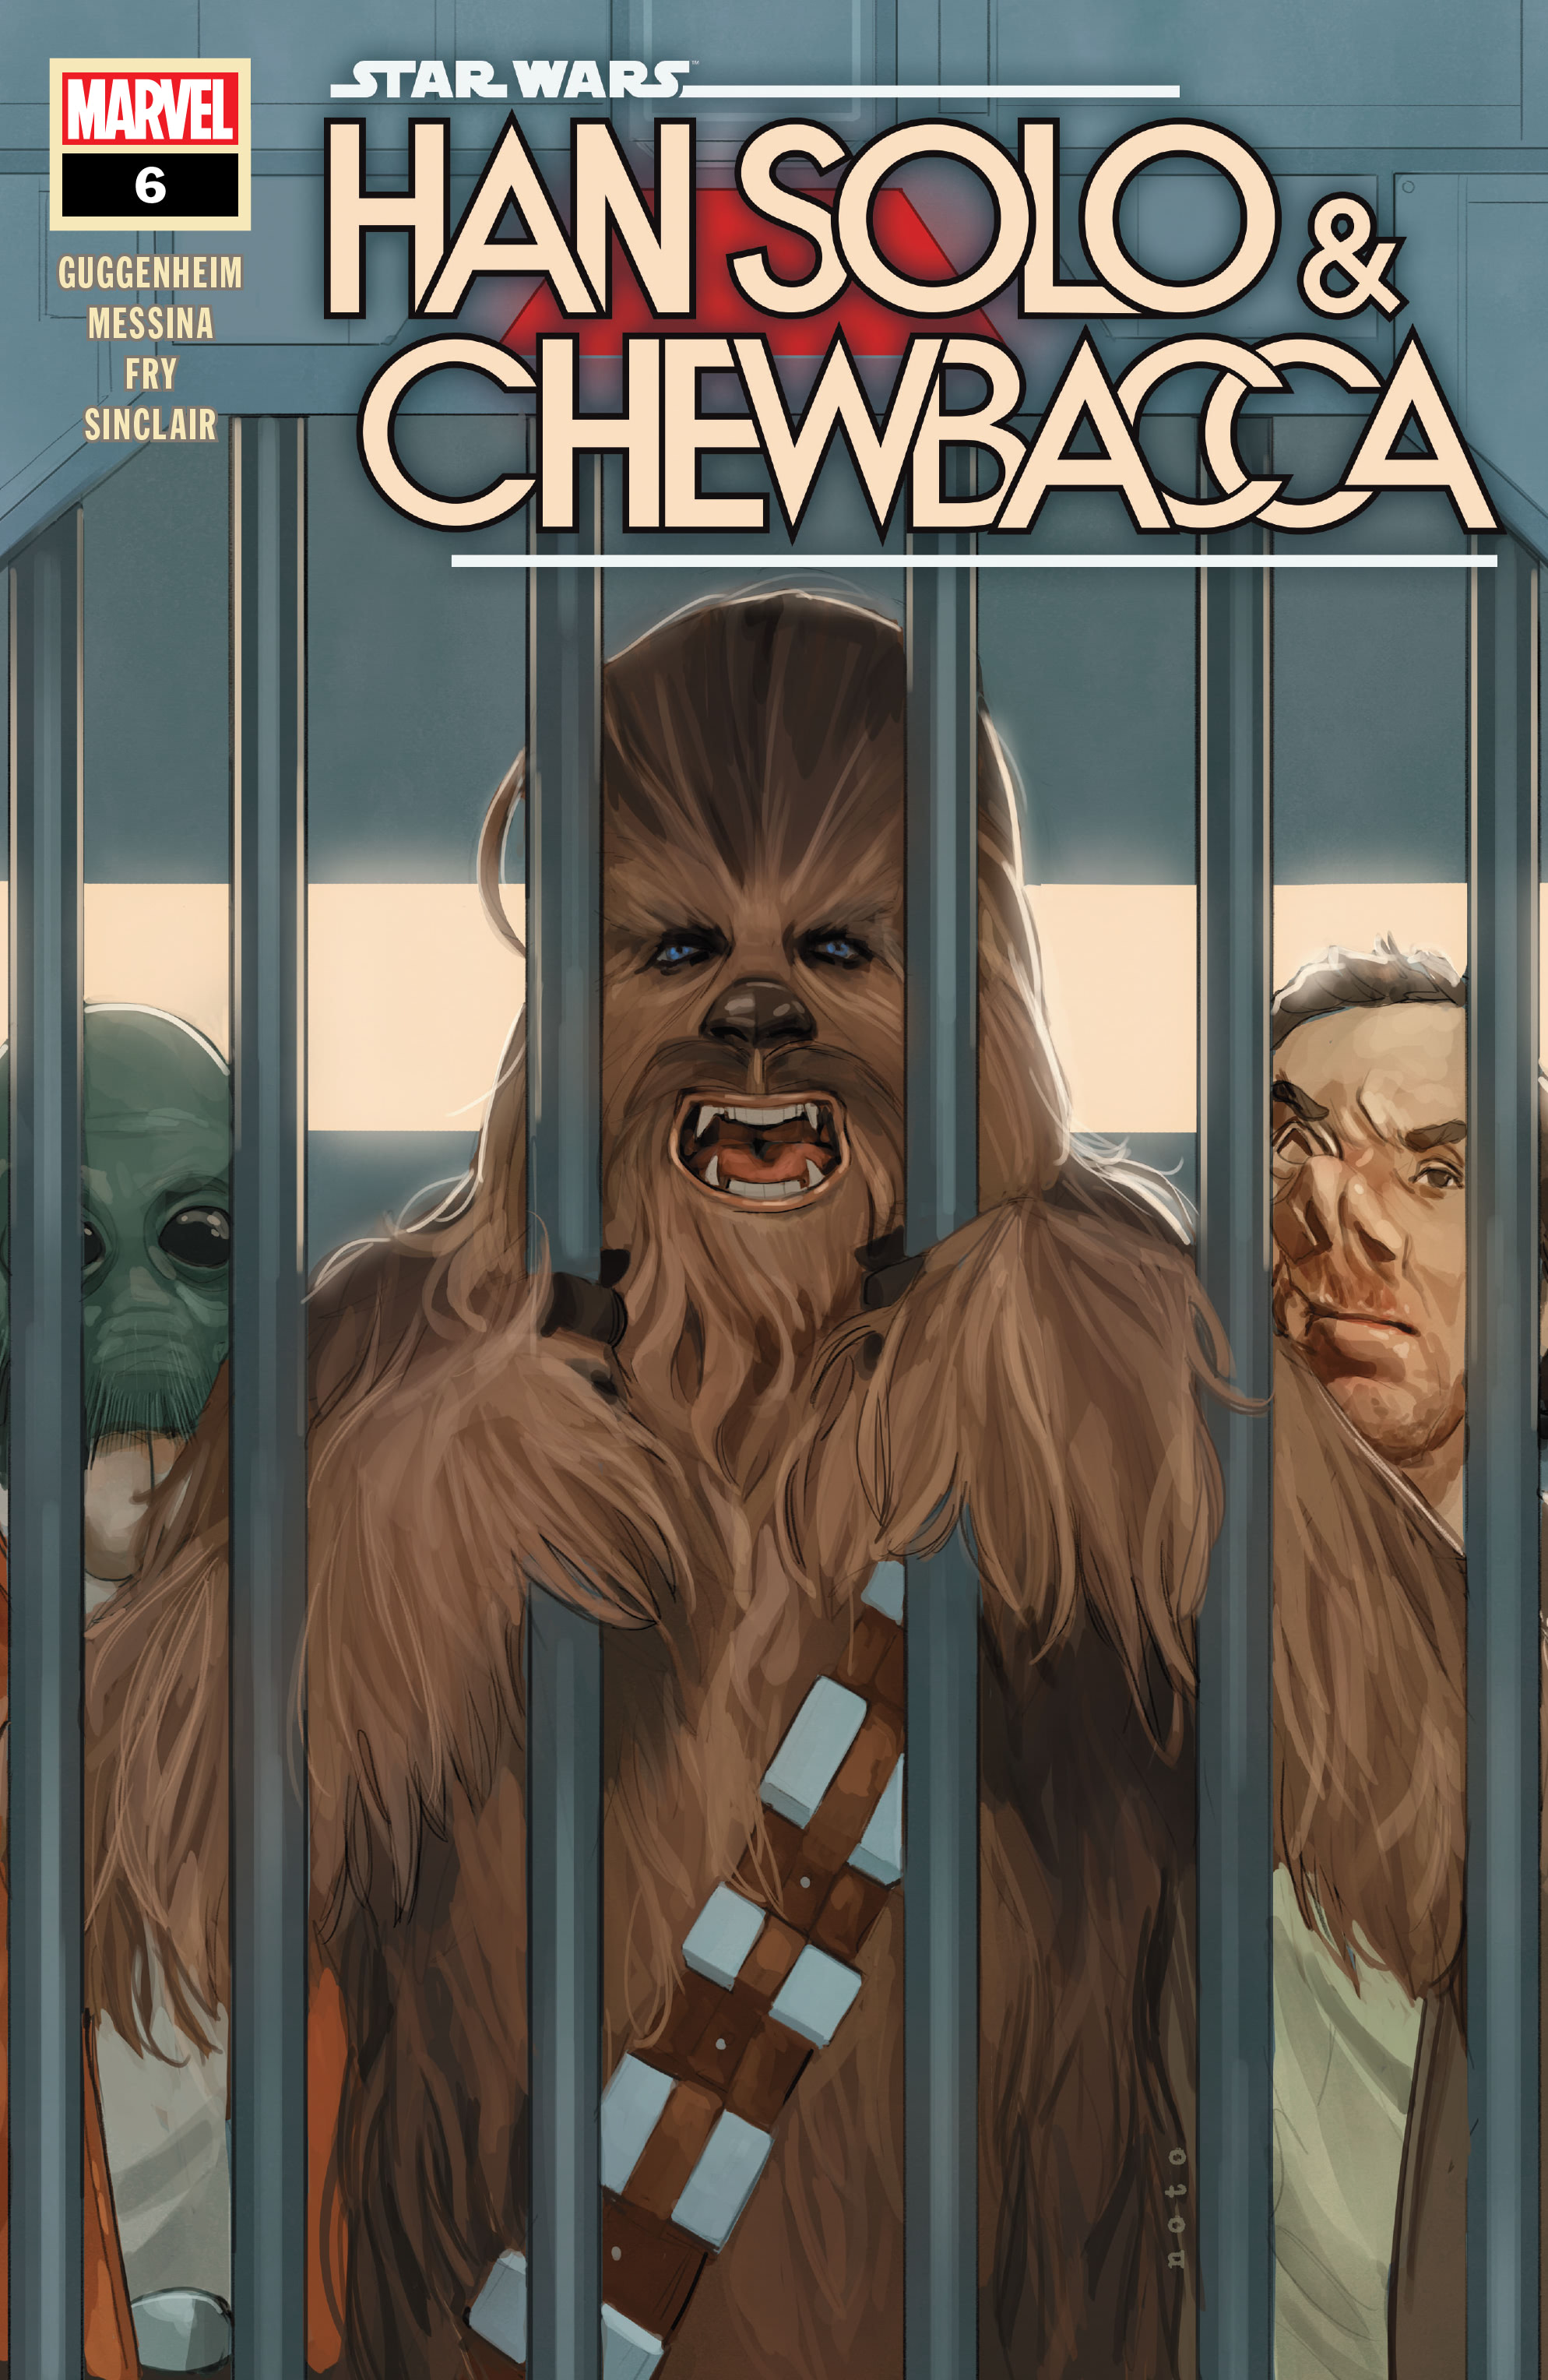 Read online Star Wars: Han Solo & Chewbacca comic -  Issue #6 - 1